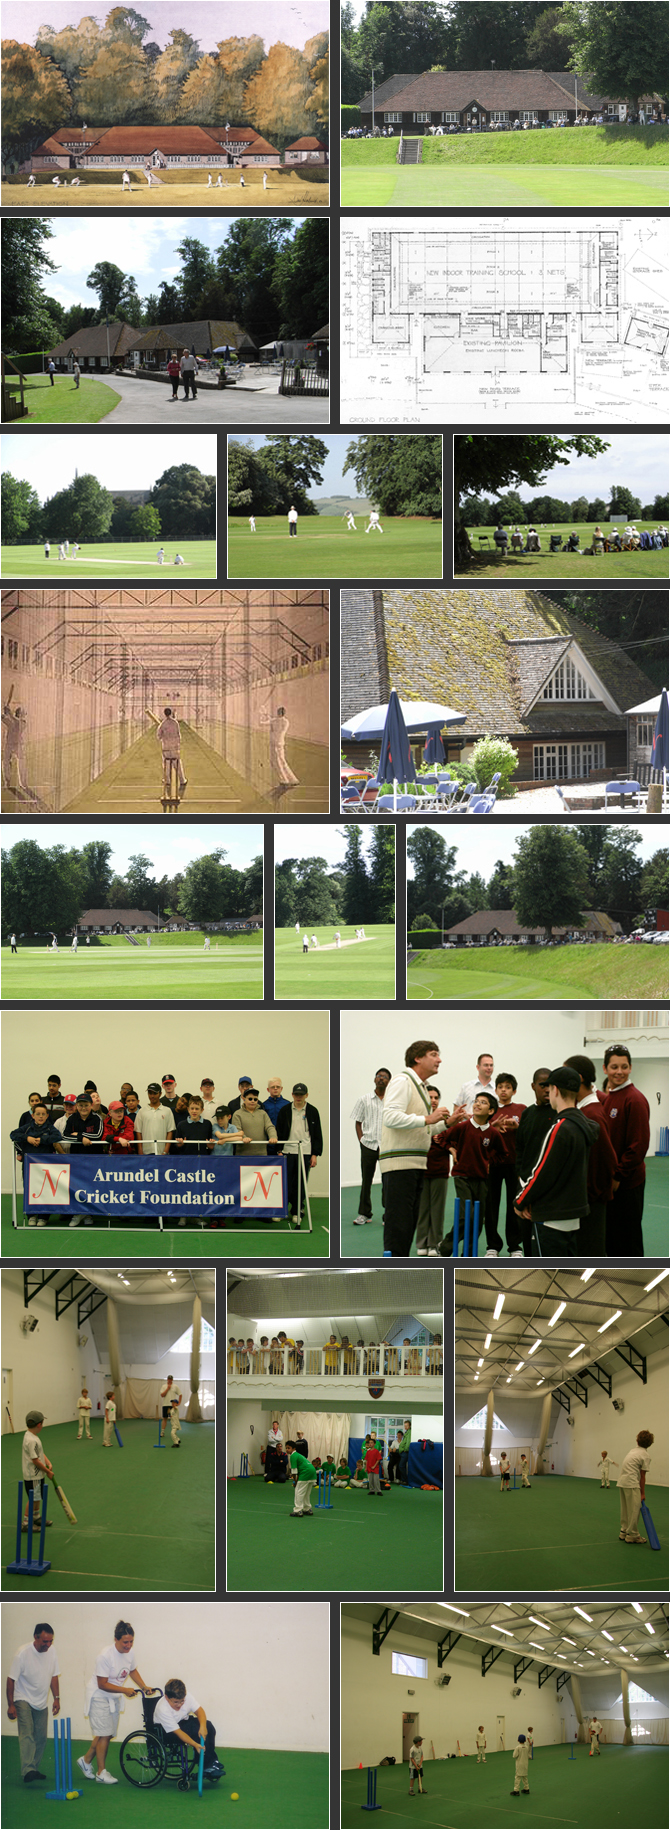 Photographs and Original Watercolour Paintings of the Cricket School